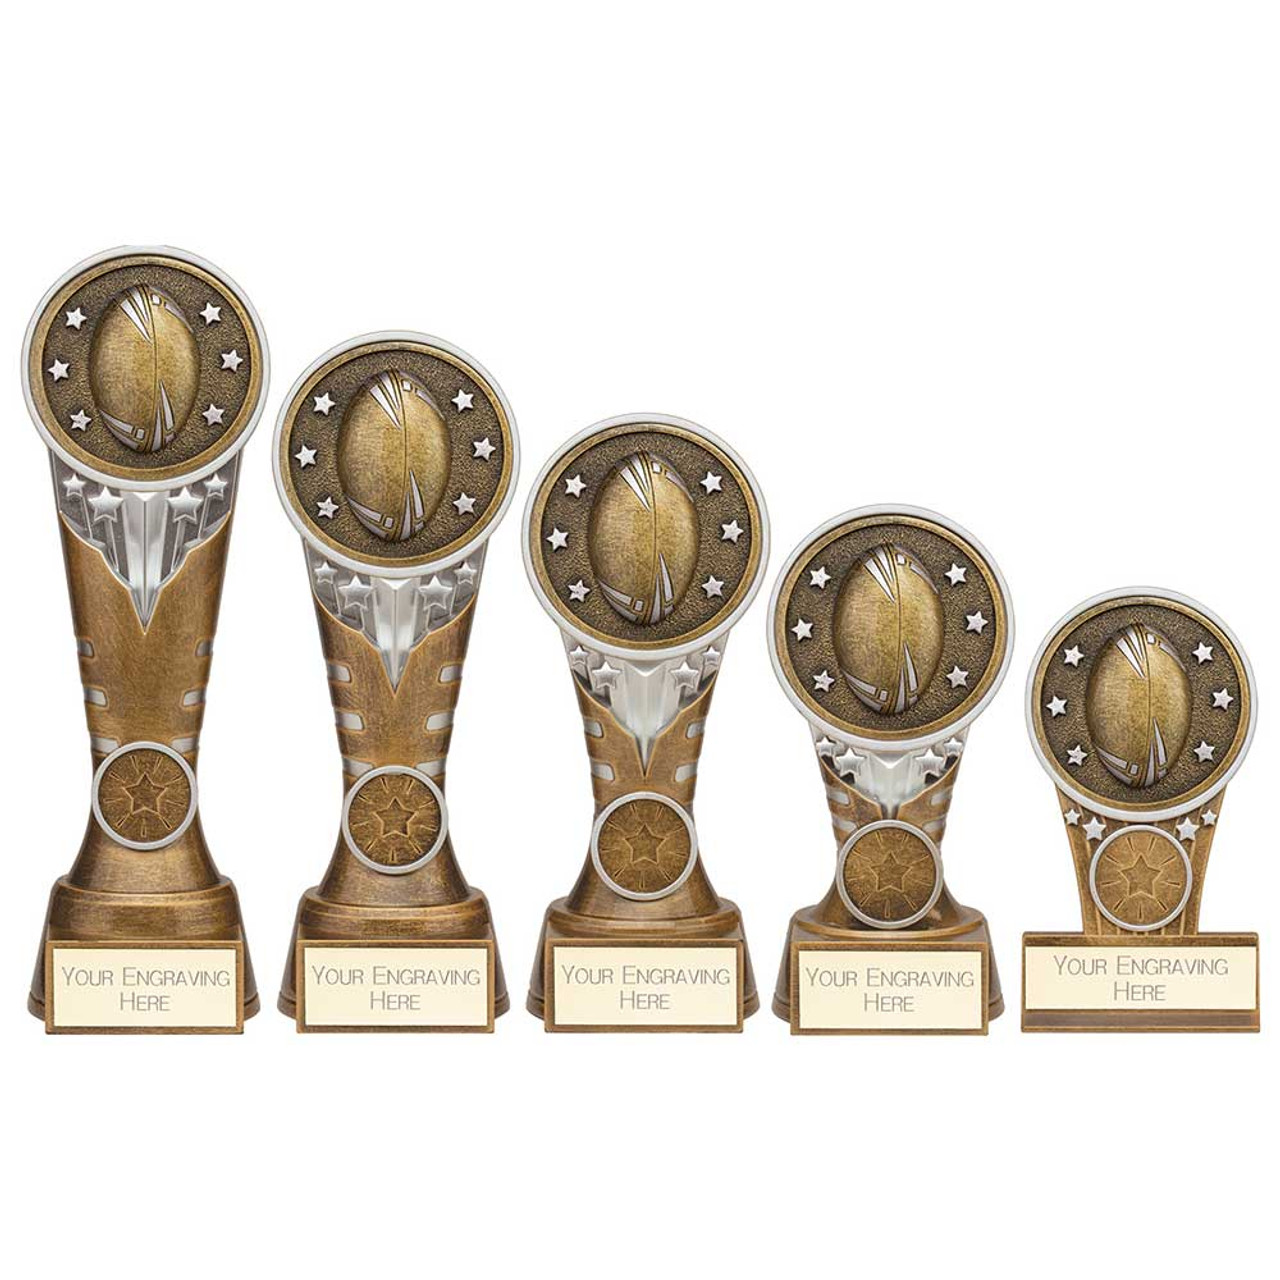 Ikon Rugby Award Gold & Silver Trophy Series in 5 Sizes